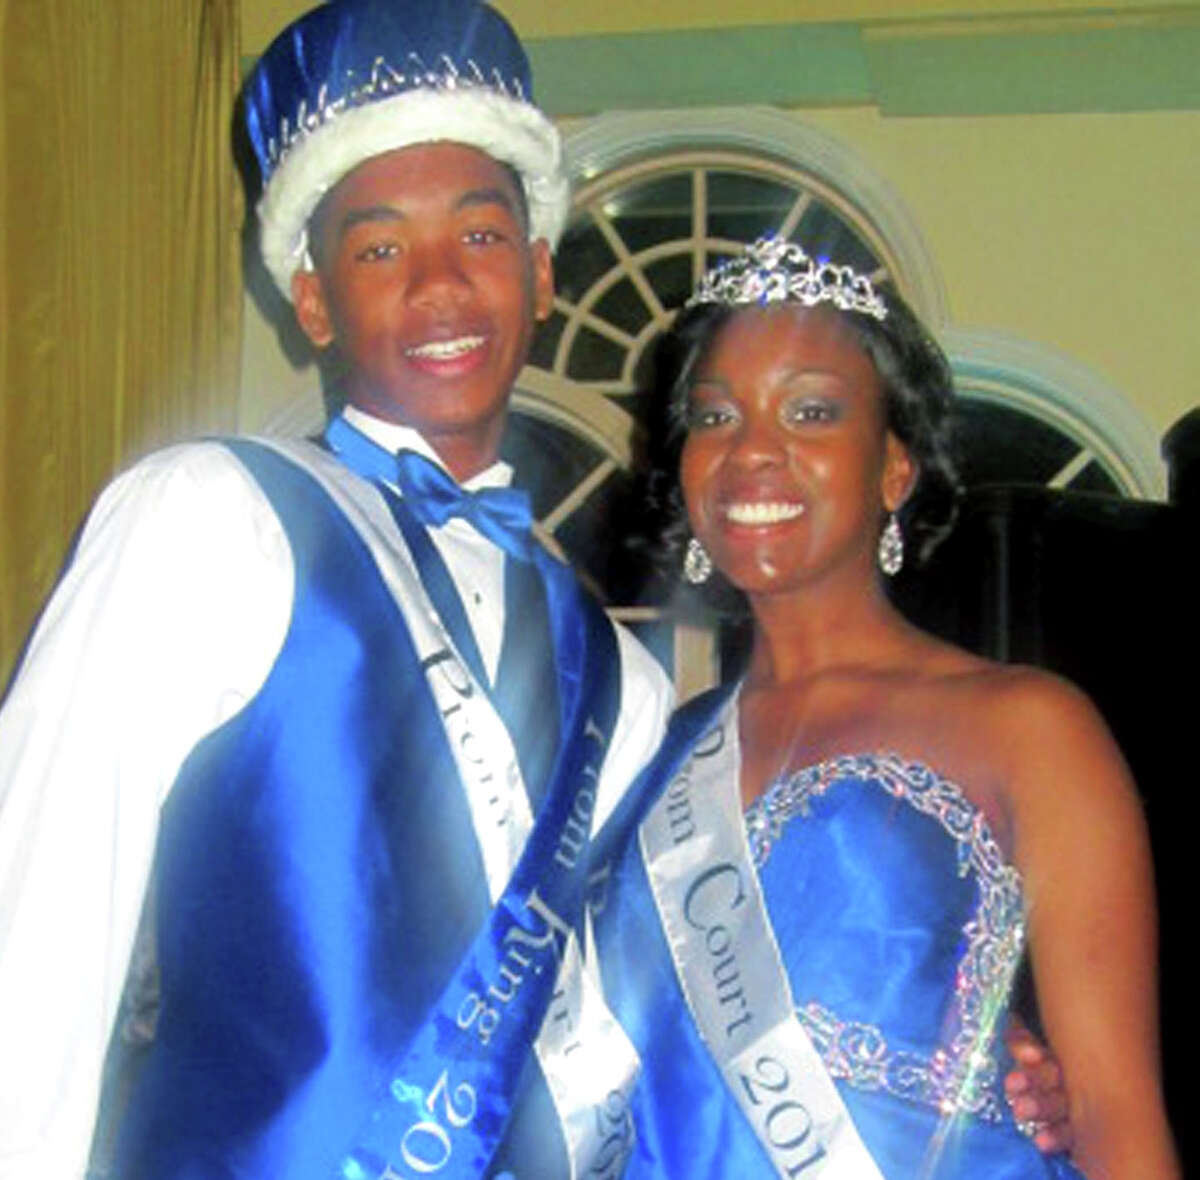 Jaden Williams and Ciana Creighton regally hold court as King and Queen at New Milford High School's Senior Prom, May 3, 2013 at the Waterview in Monroe.